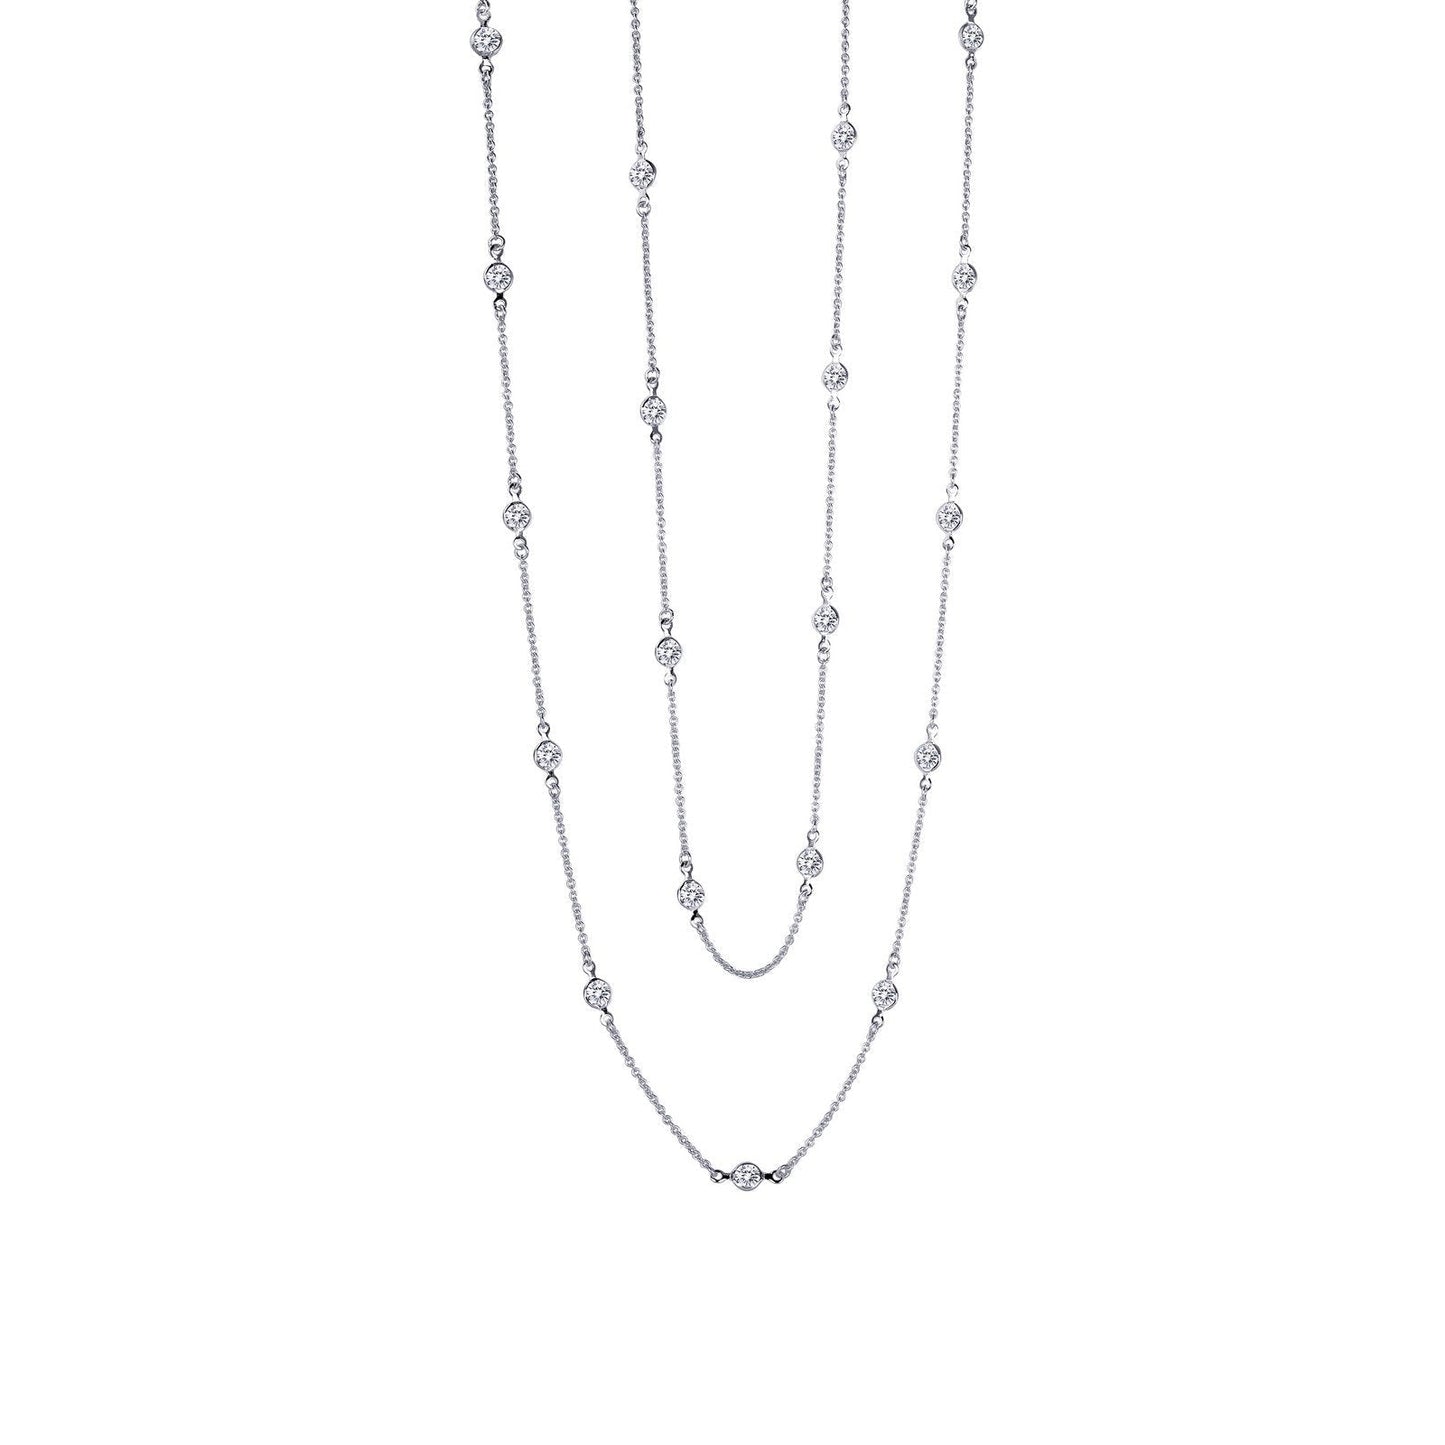 Lafonn Classic Station Necklace Simulated Diamond NECKLACES Platinum 6 CTS 